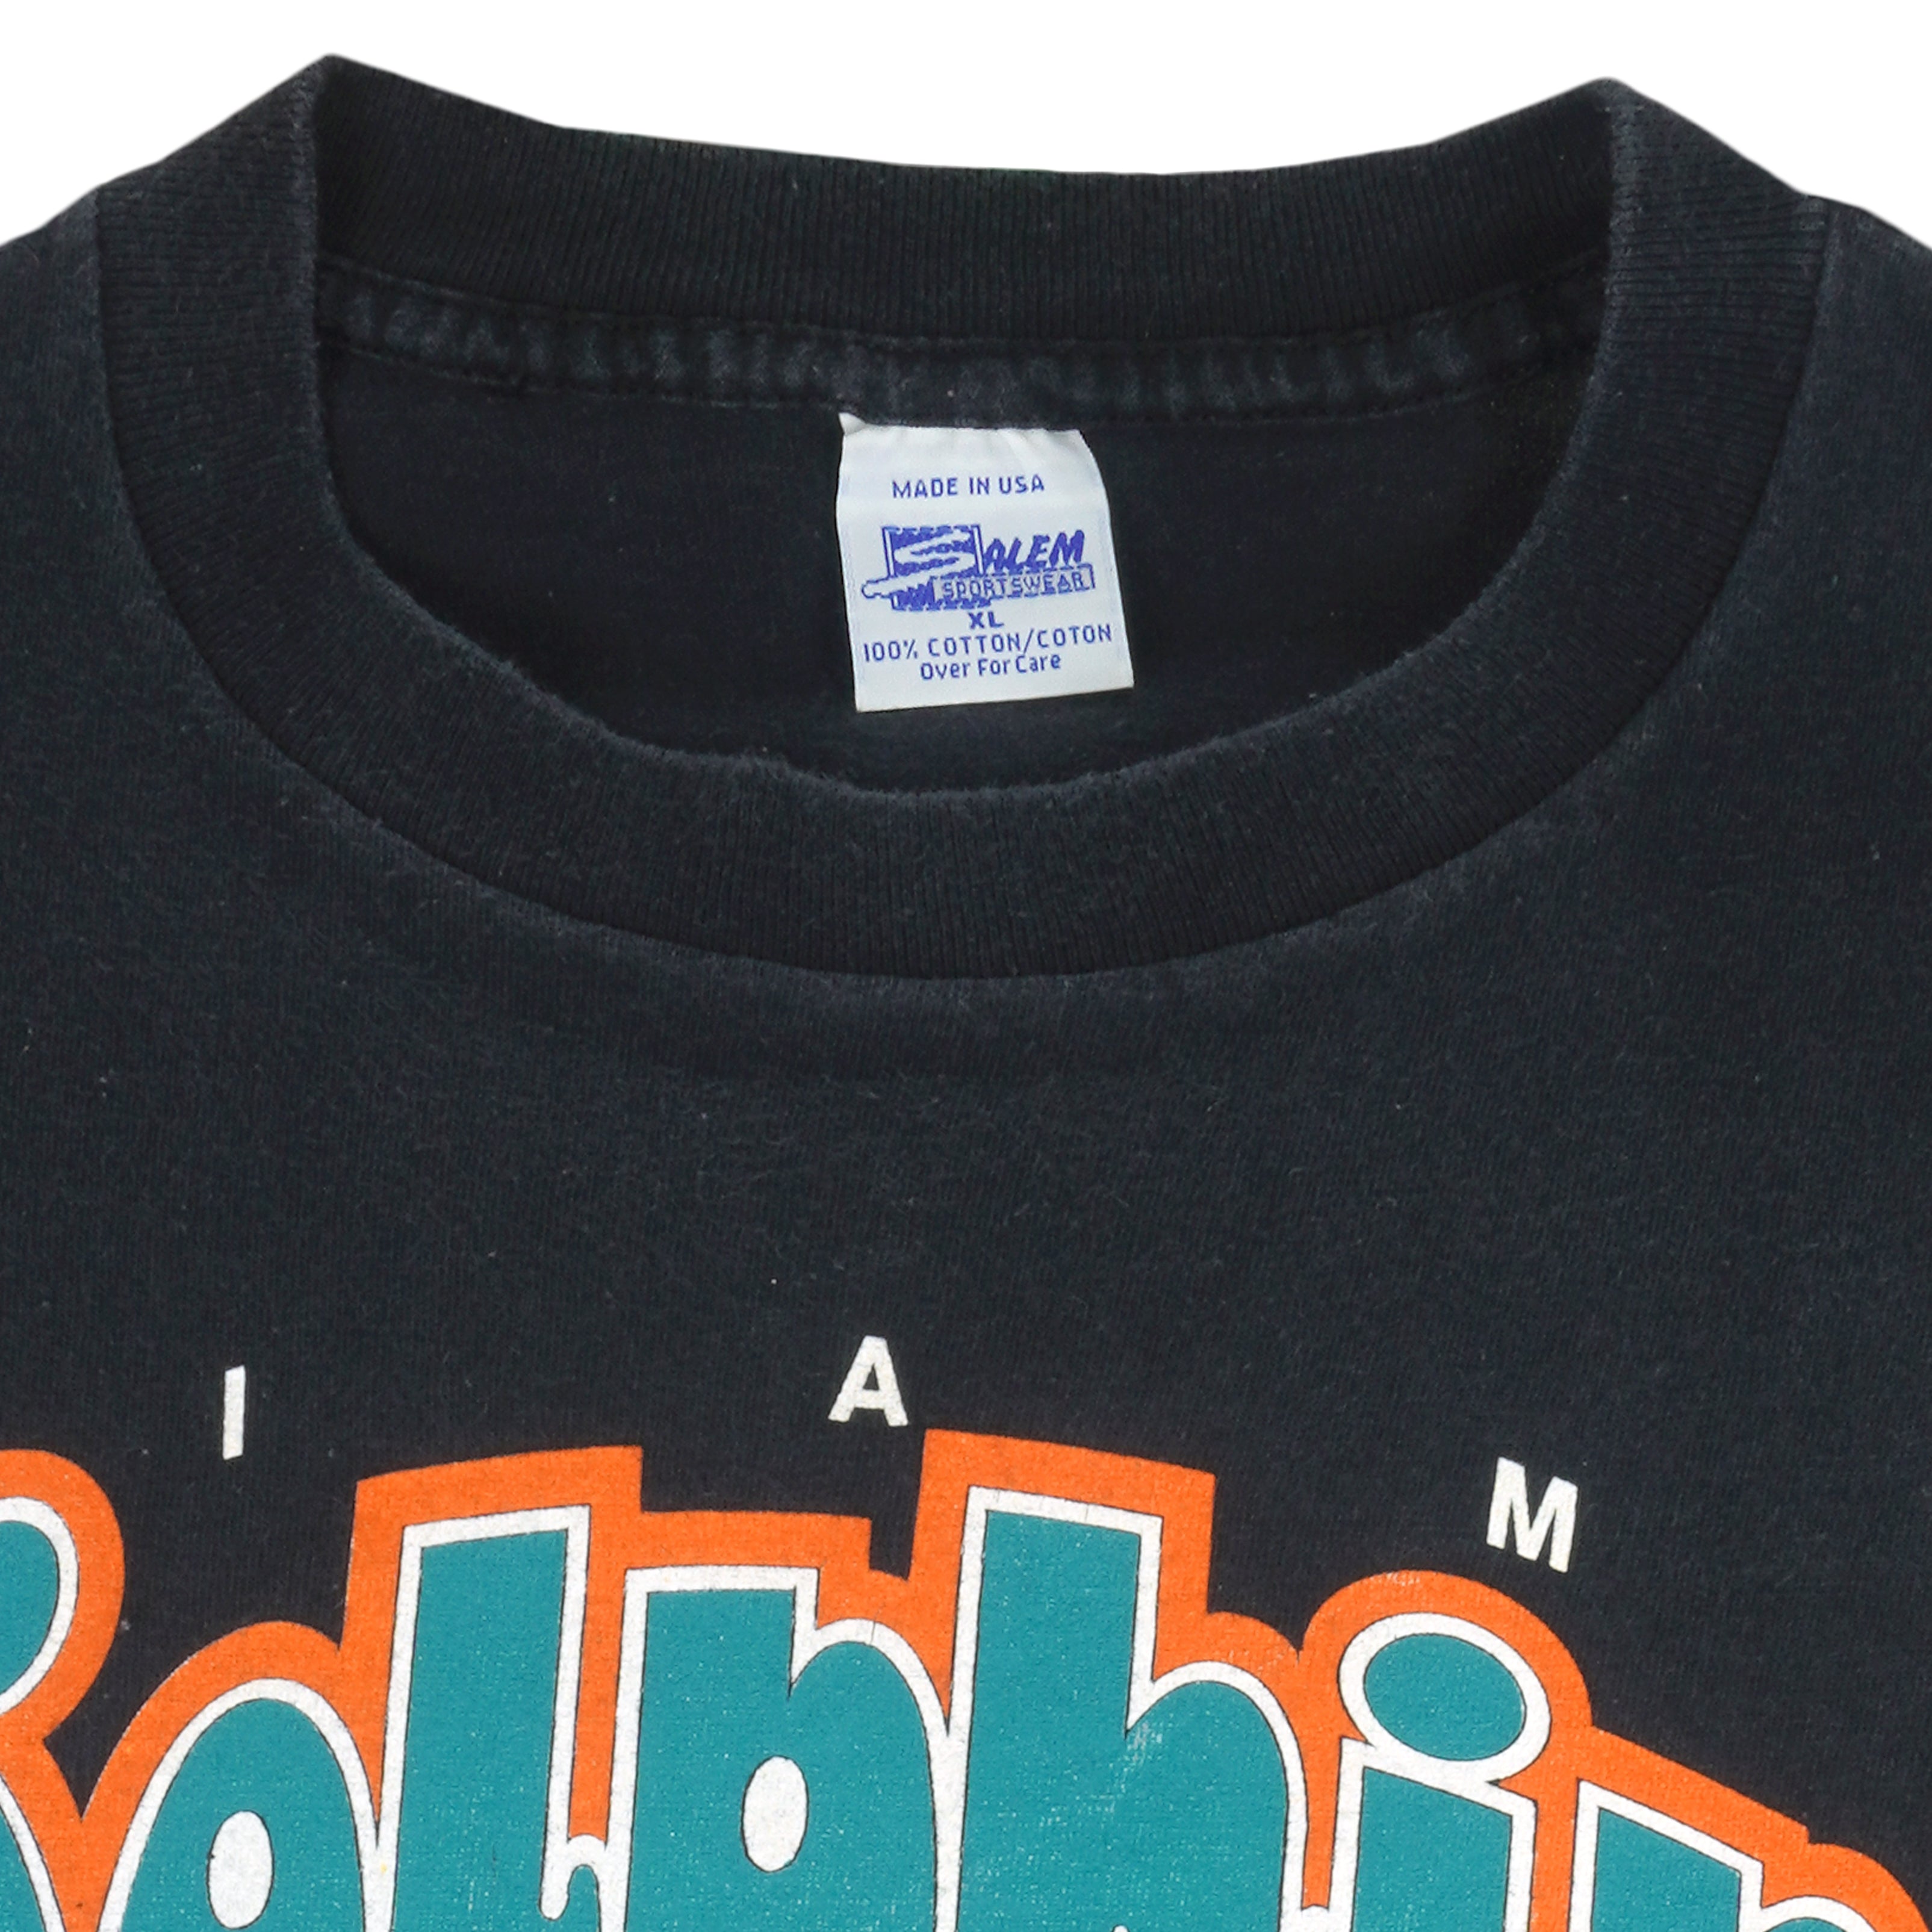 Miami Dolphins Vintage Nfl Football T Shirt by Trench Made in 